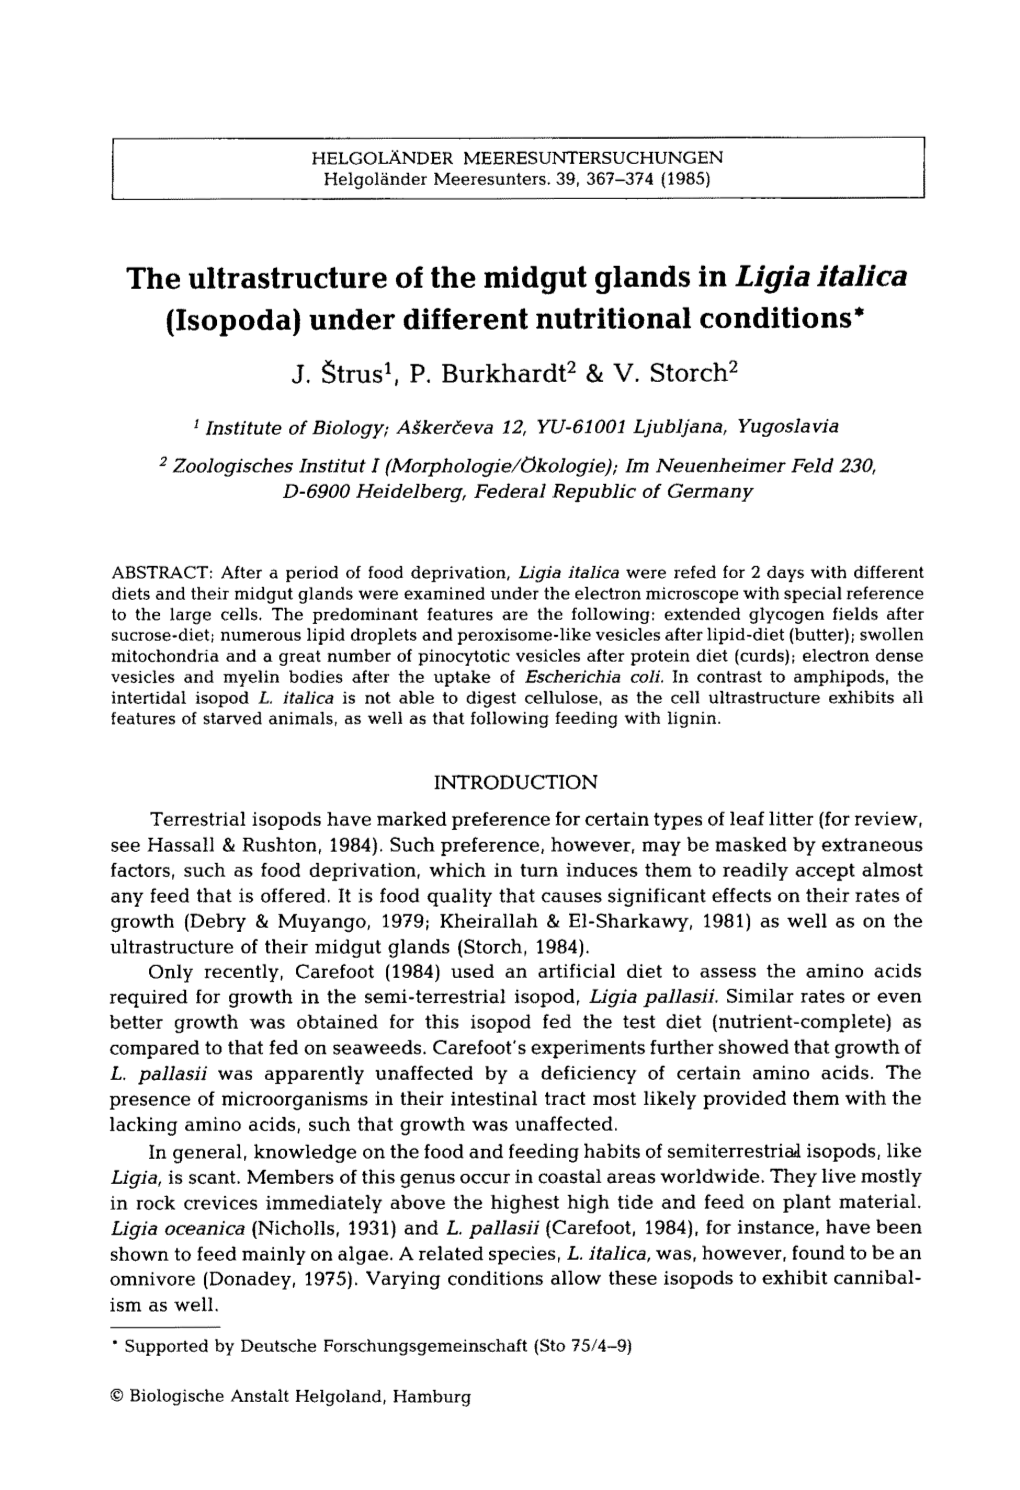 The Ultrastructure of the Midgut Glands in Ligia Italica (Isopoda) Under Different Nutritional Conditions*